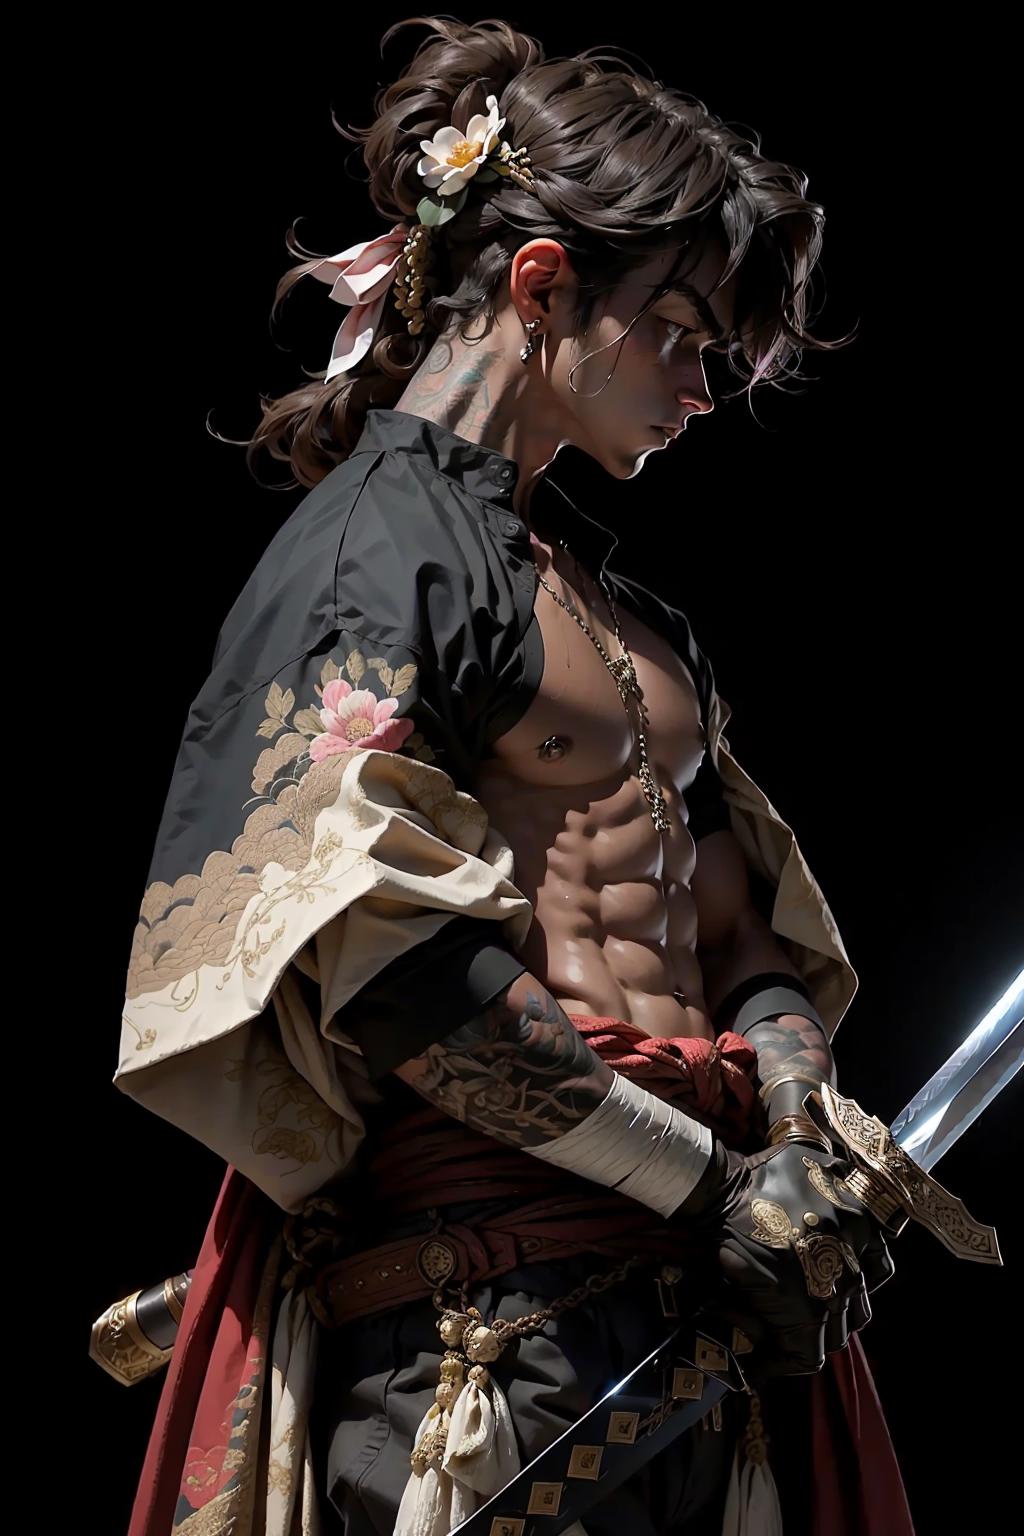 A shirtless male with tattoos, holding a sword and wearing a kimono.